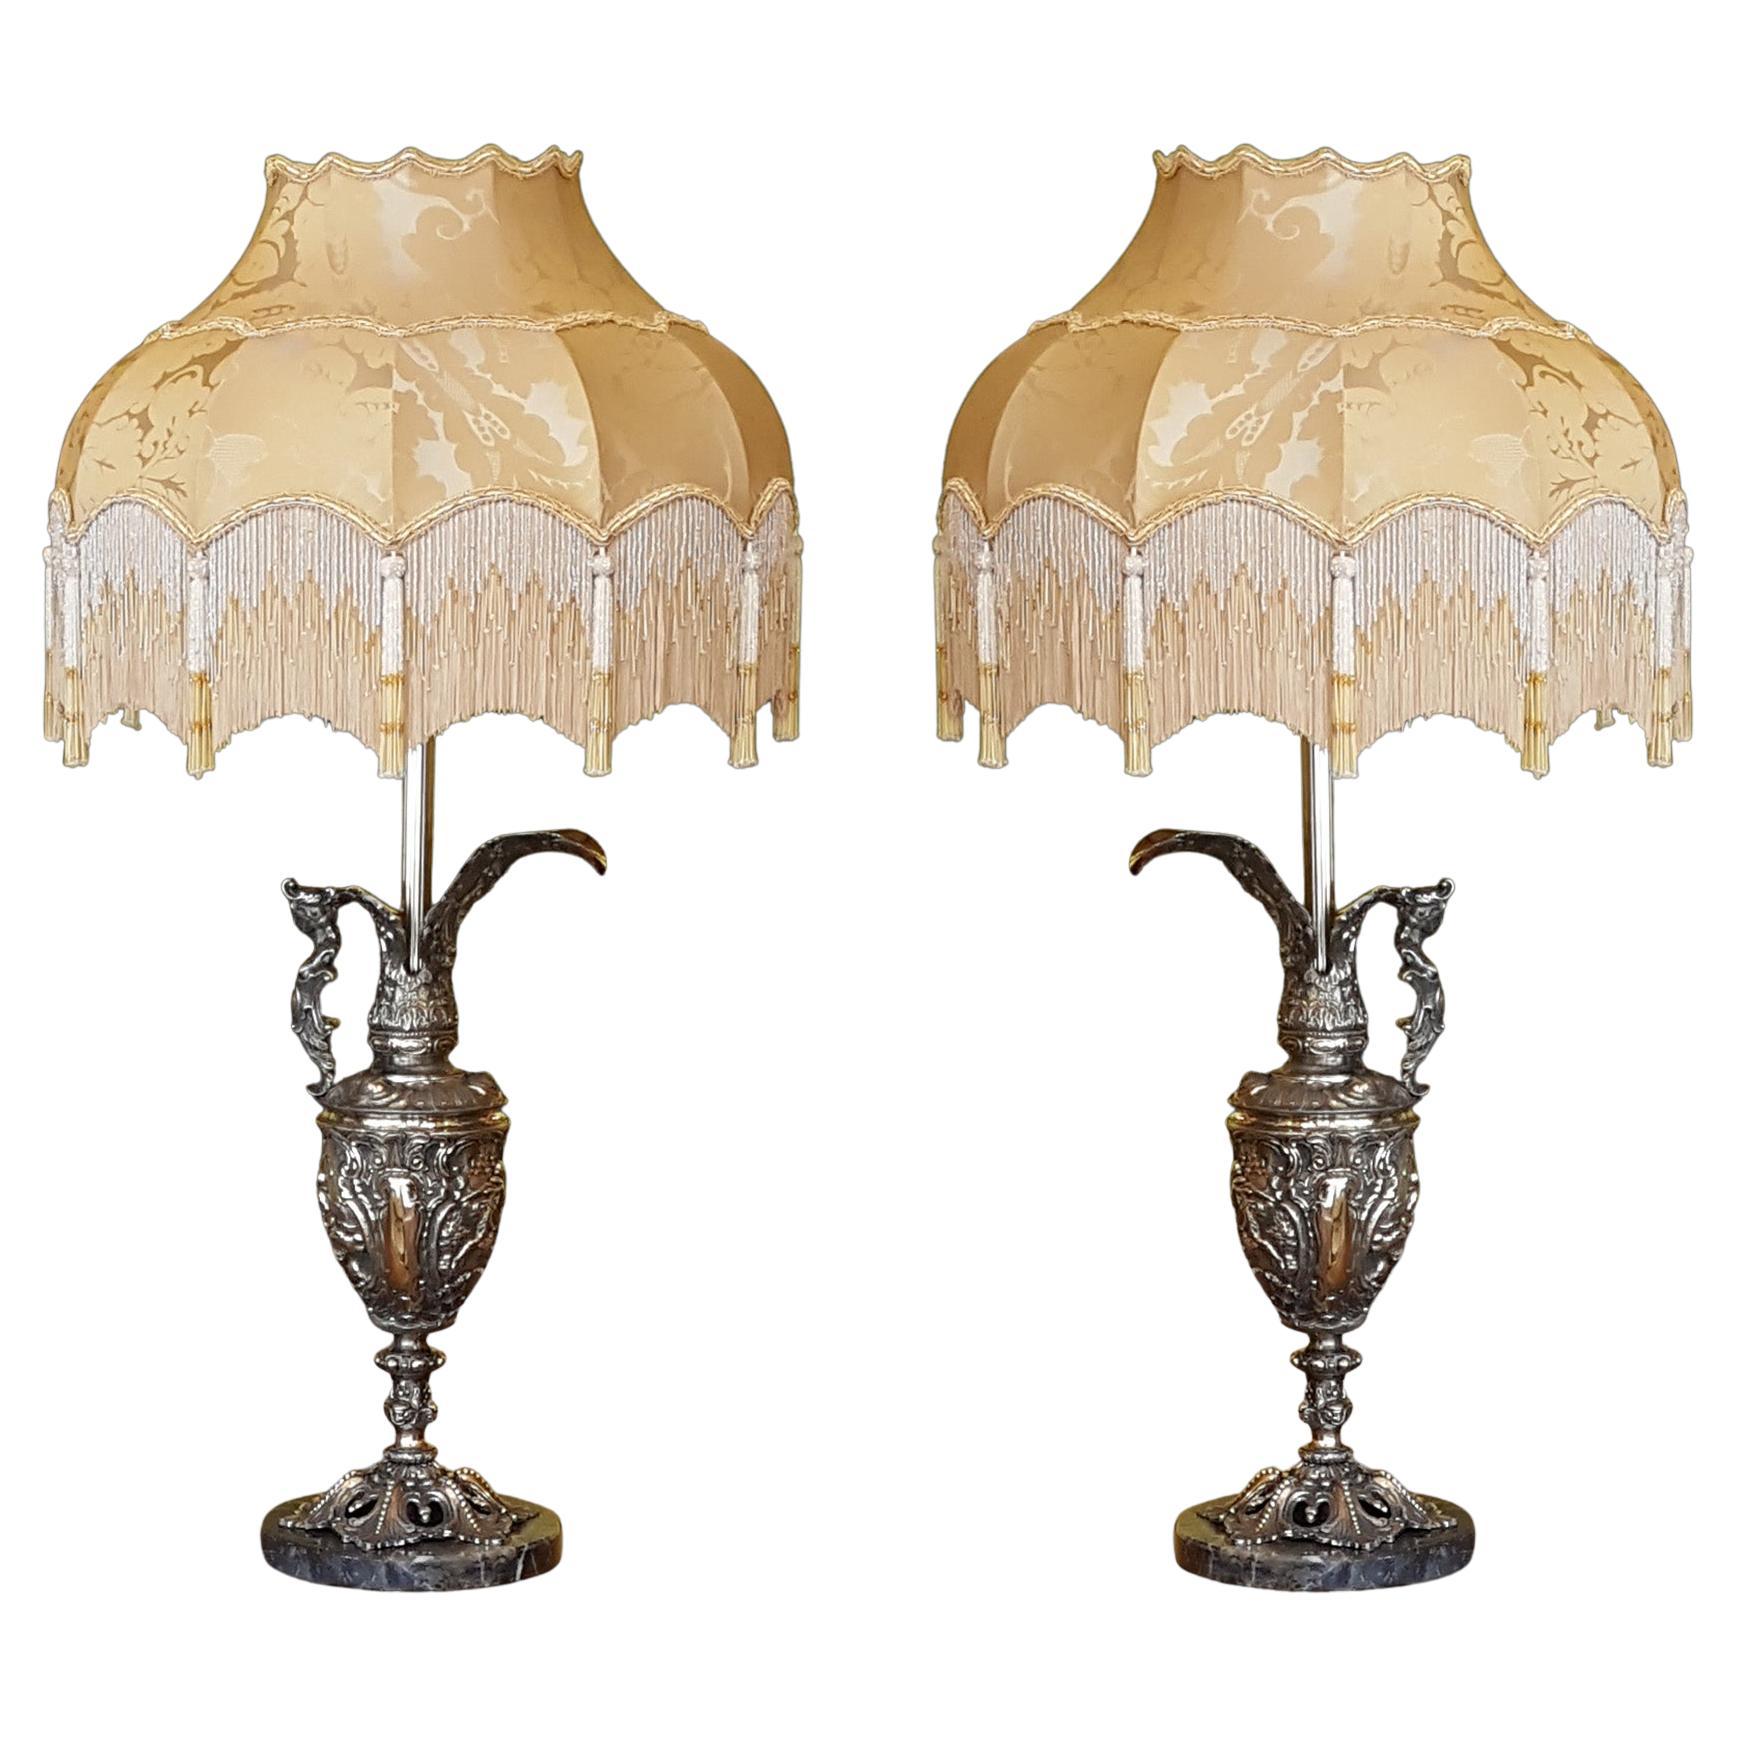 Pair of Late 19th Century Gilt Ewer Lamps